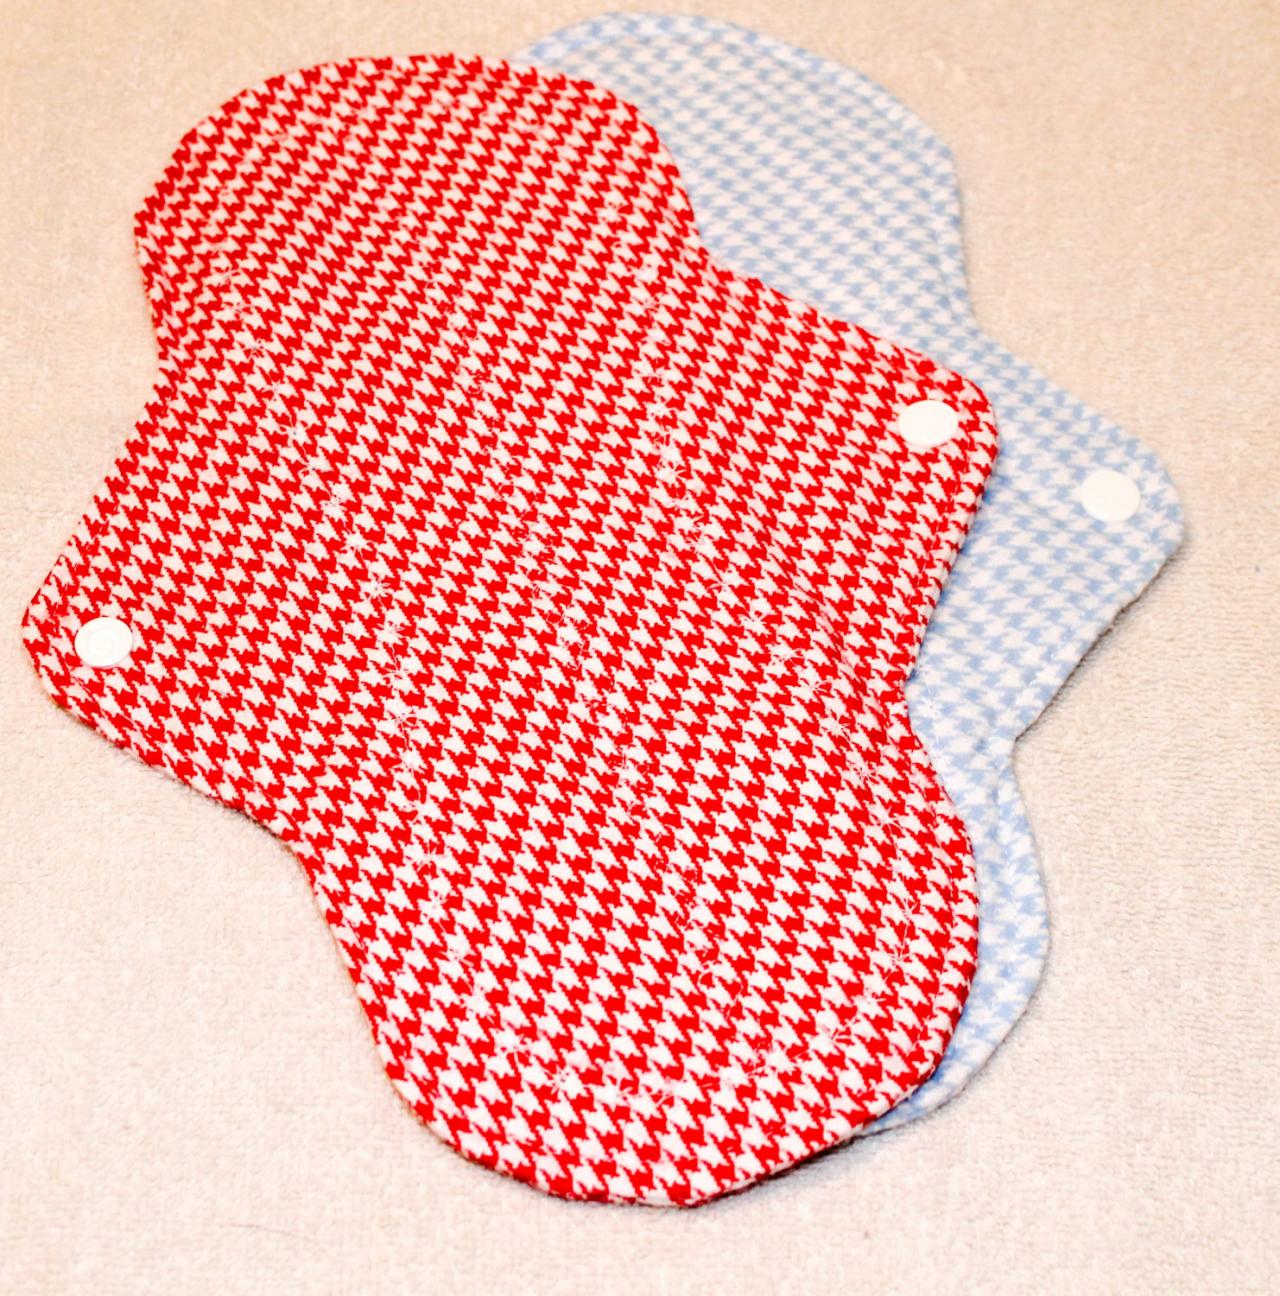 Two, 10 Inch Washable Leak Proof Menstrual Pads Choose Your Print